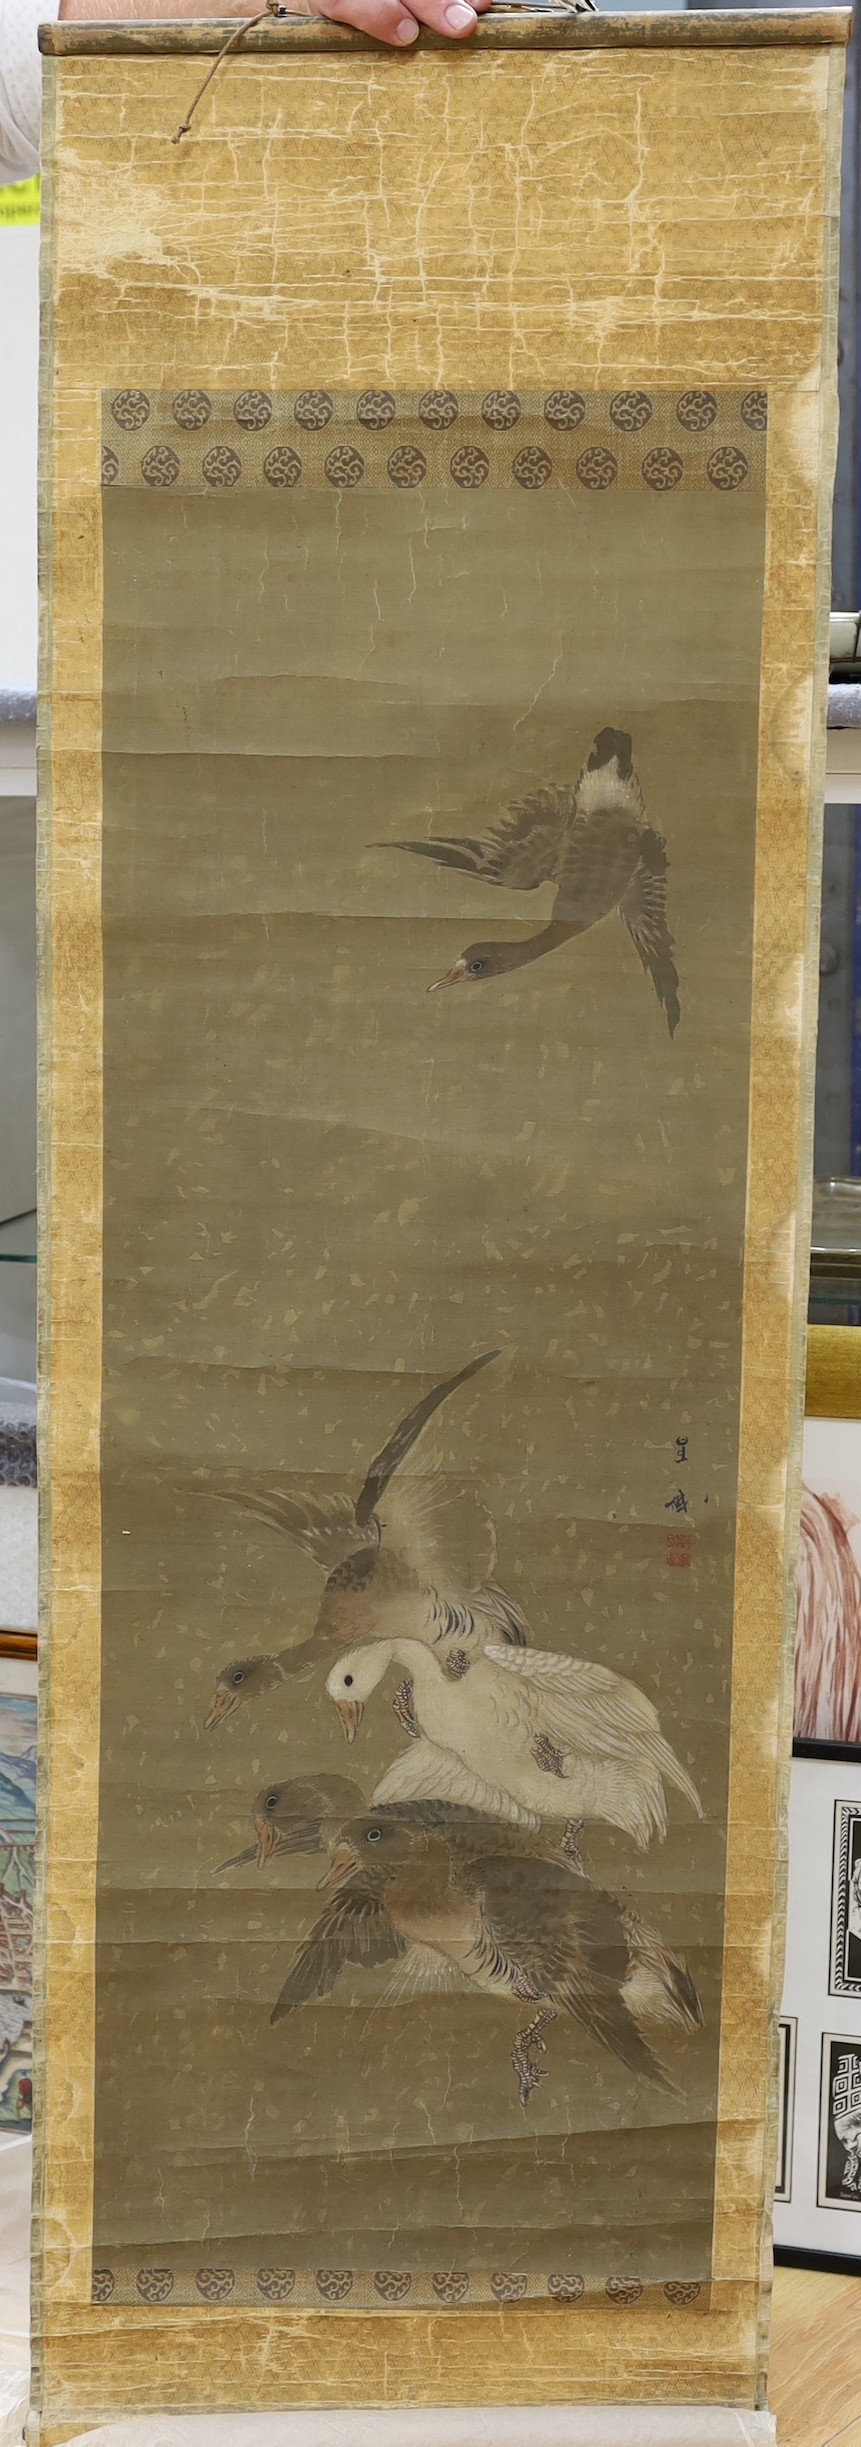 A 19th century Japanese scroll painting on silk of geese, signed, image 102 cm X 36 cm